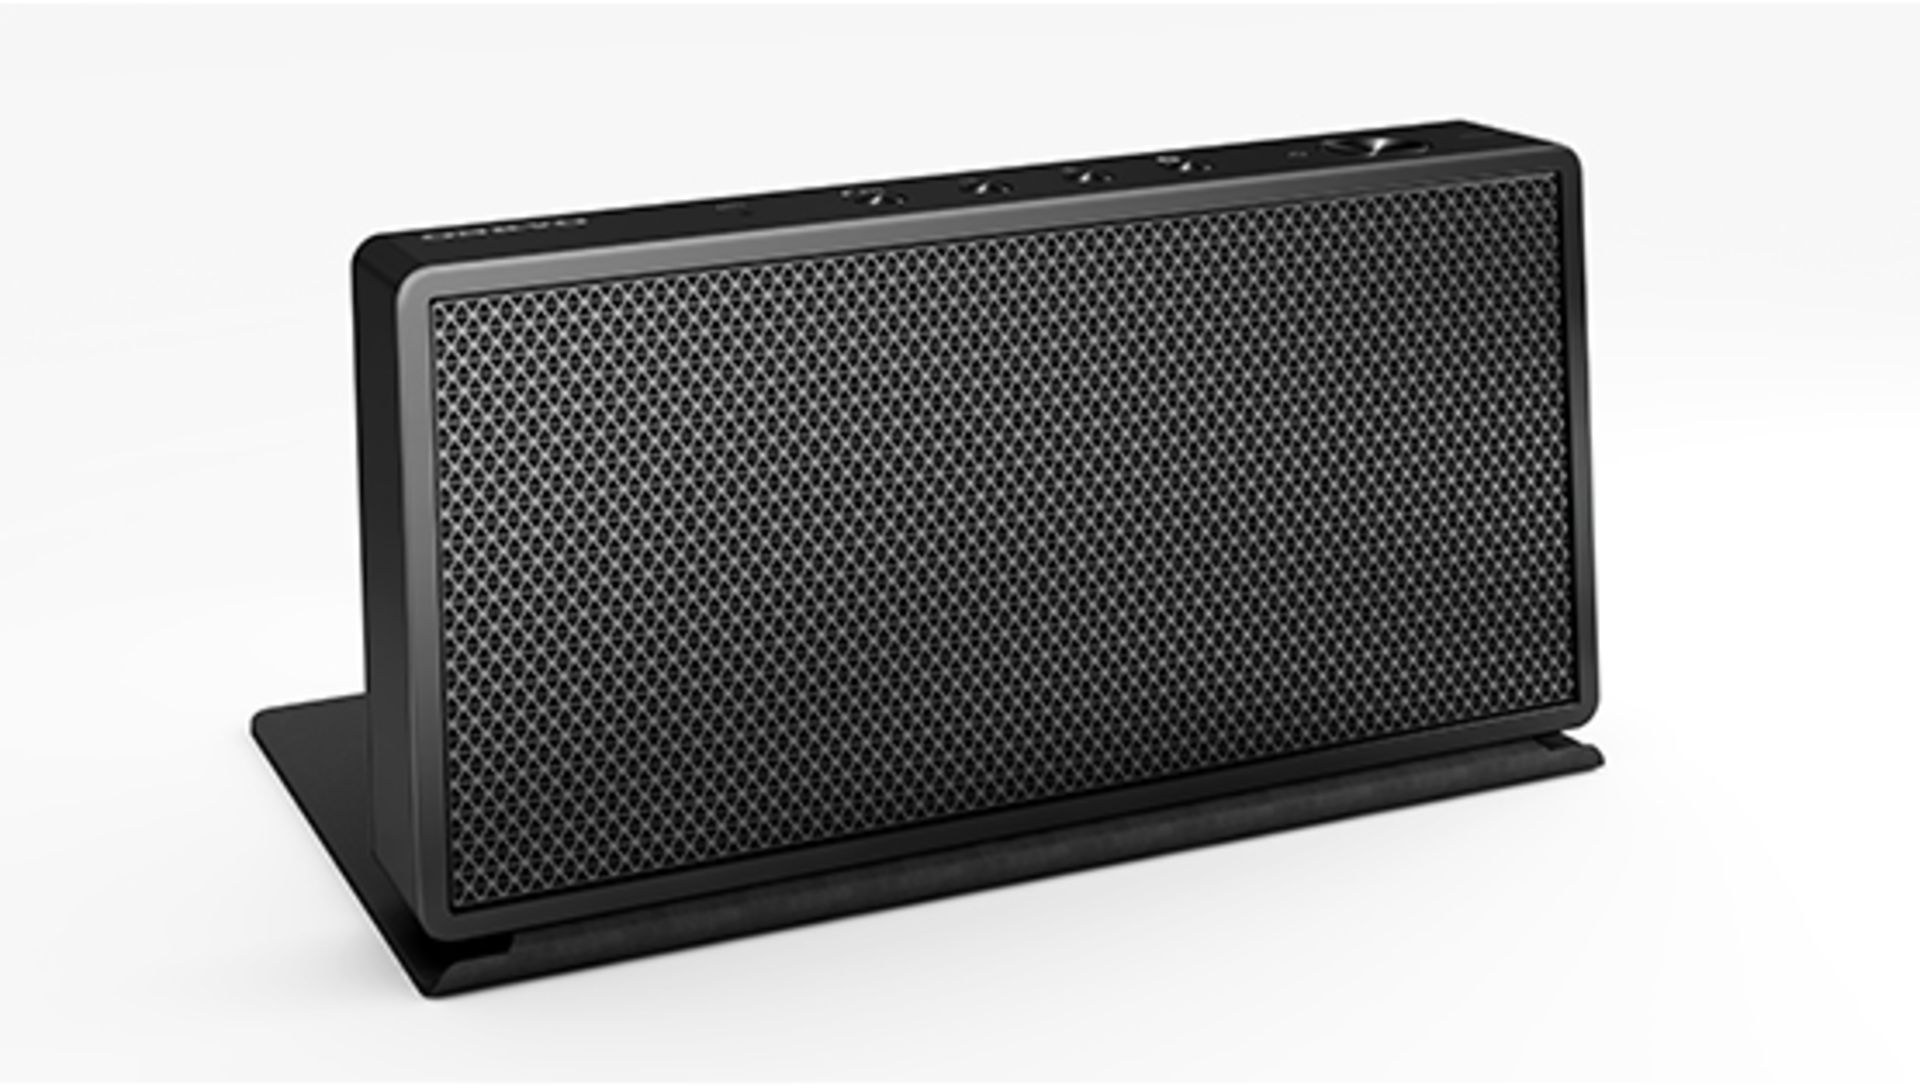 V Brand New Onkyo T3 Lightweight Portable Bluetooth Speaker with USB output for Charging Devices - 8